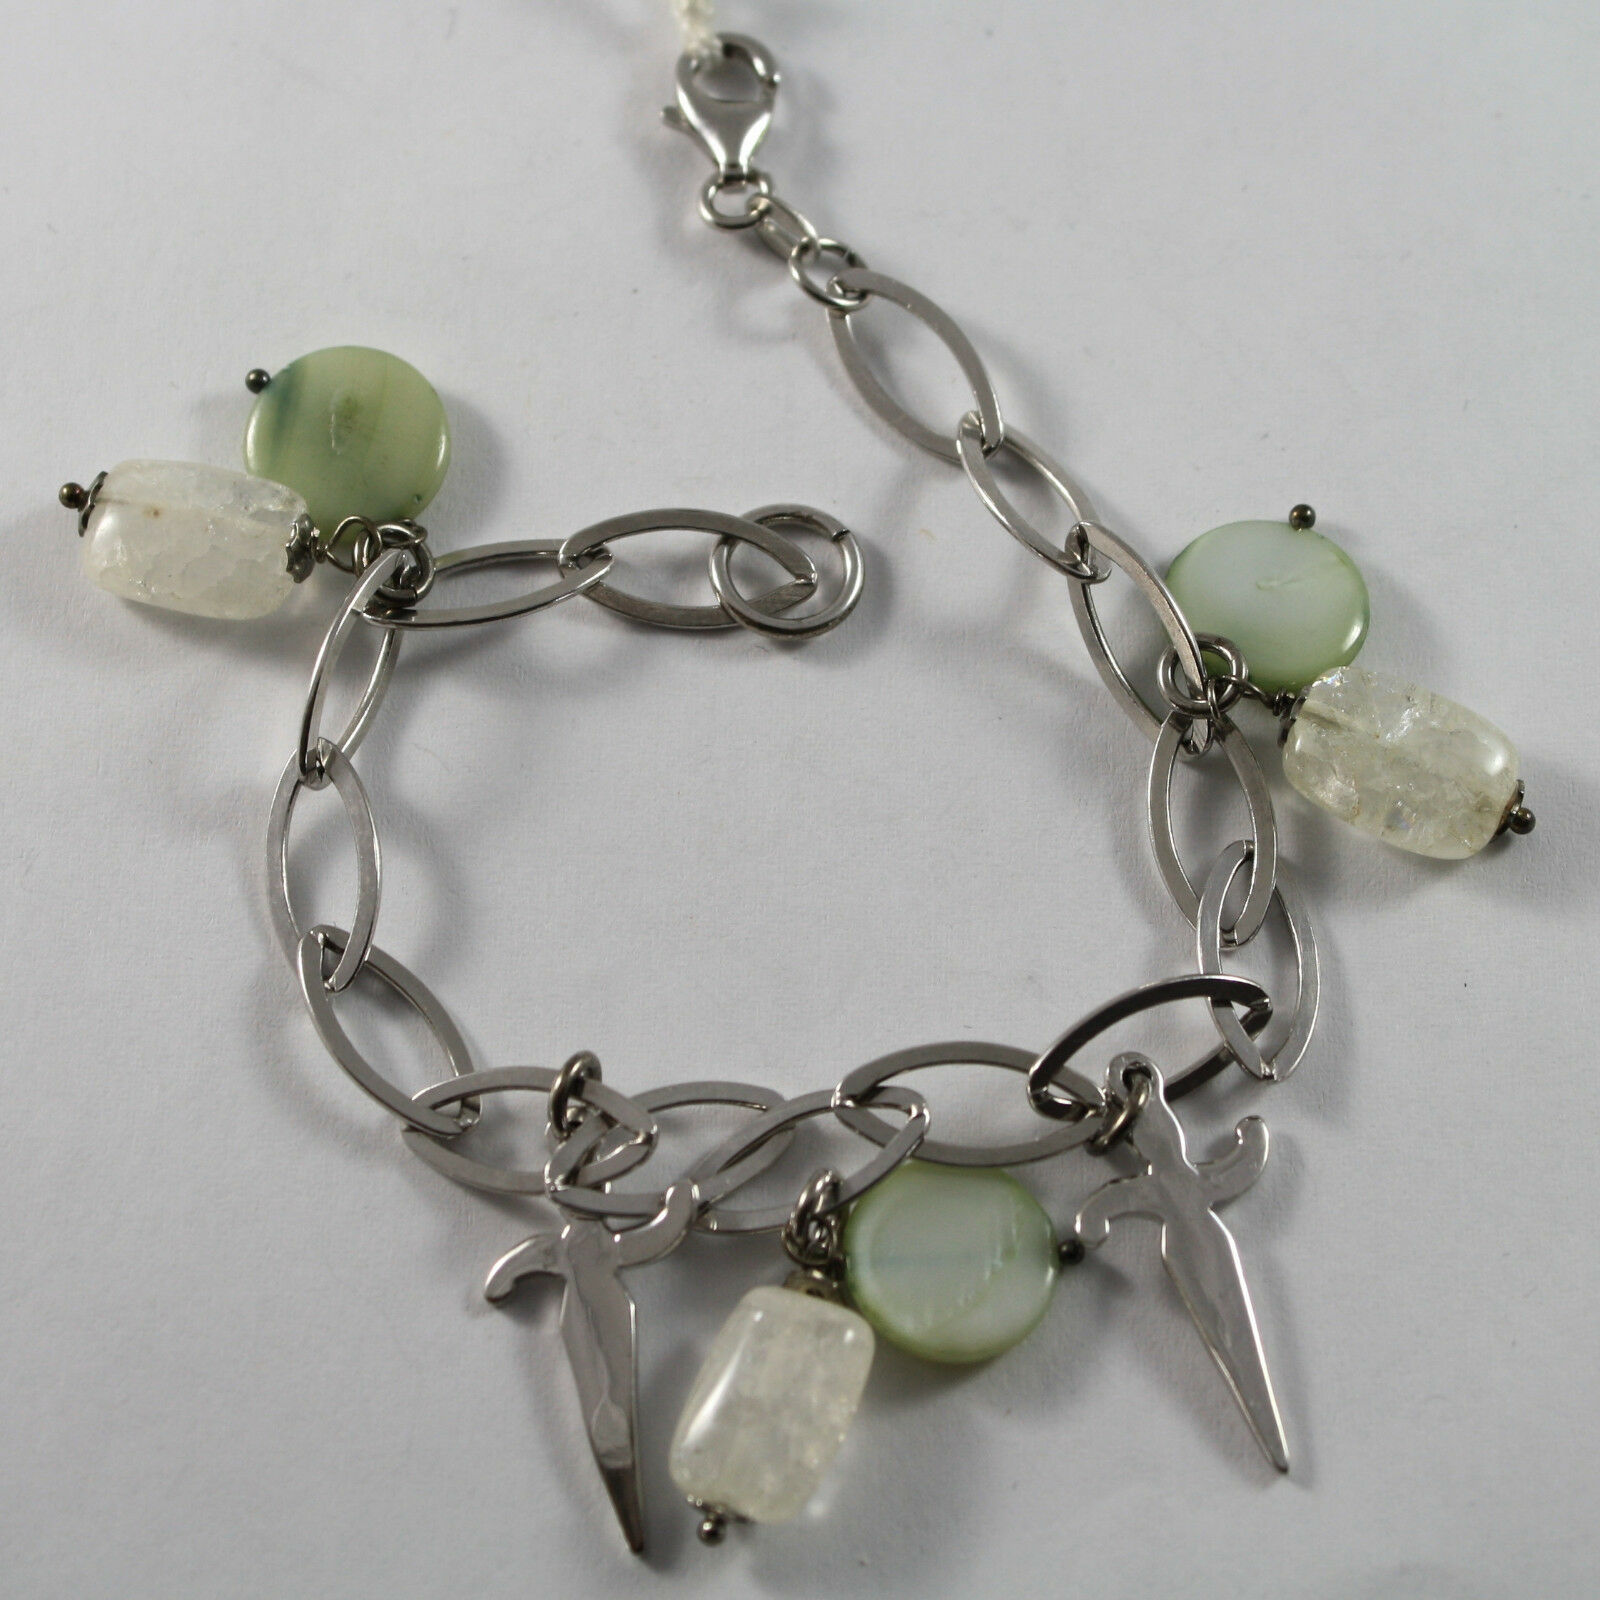 .925 RHODIUM SILVER  BRACELET WITH CRISTAL, GREEN MOTHER OF PEARL AND CHARMS - $44.80